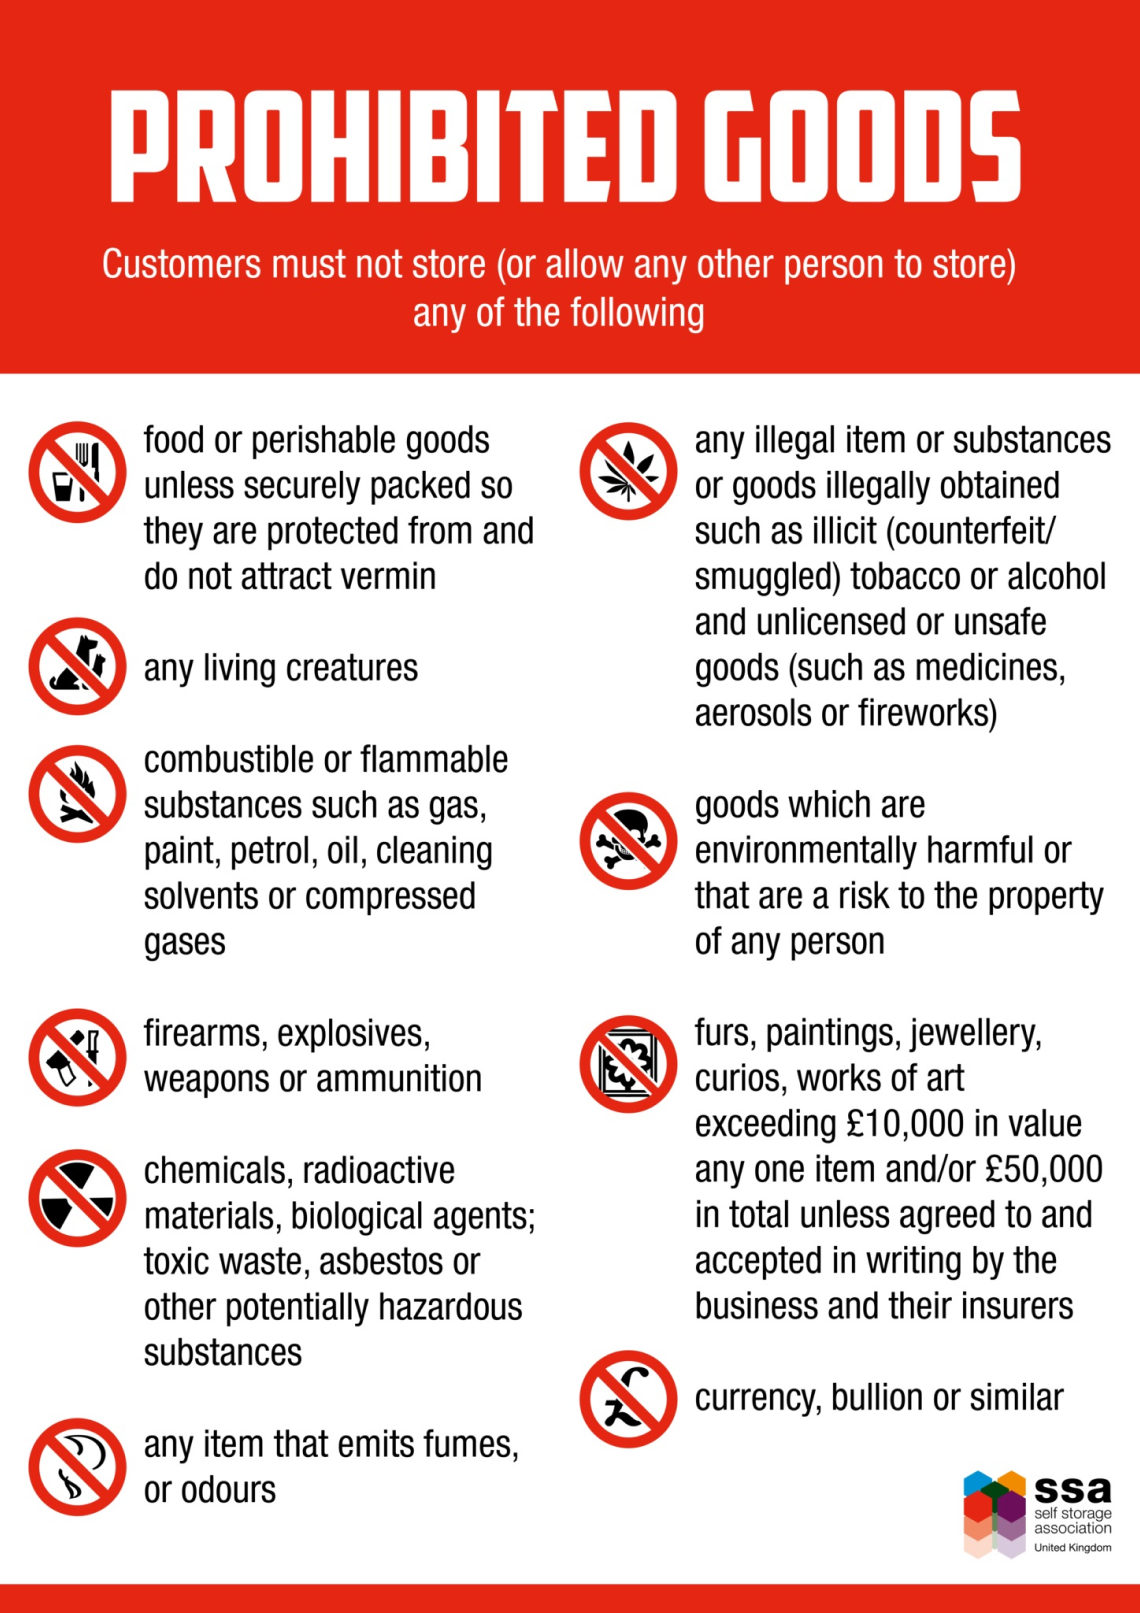 Customers must not store (or allow any other person to store) any of the items listed in this image. 